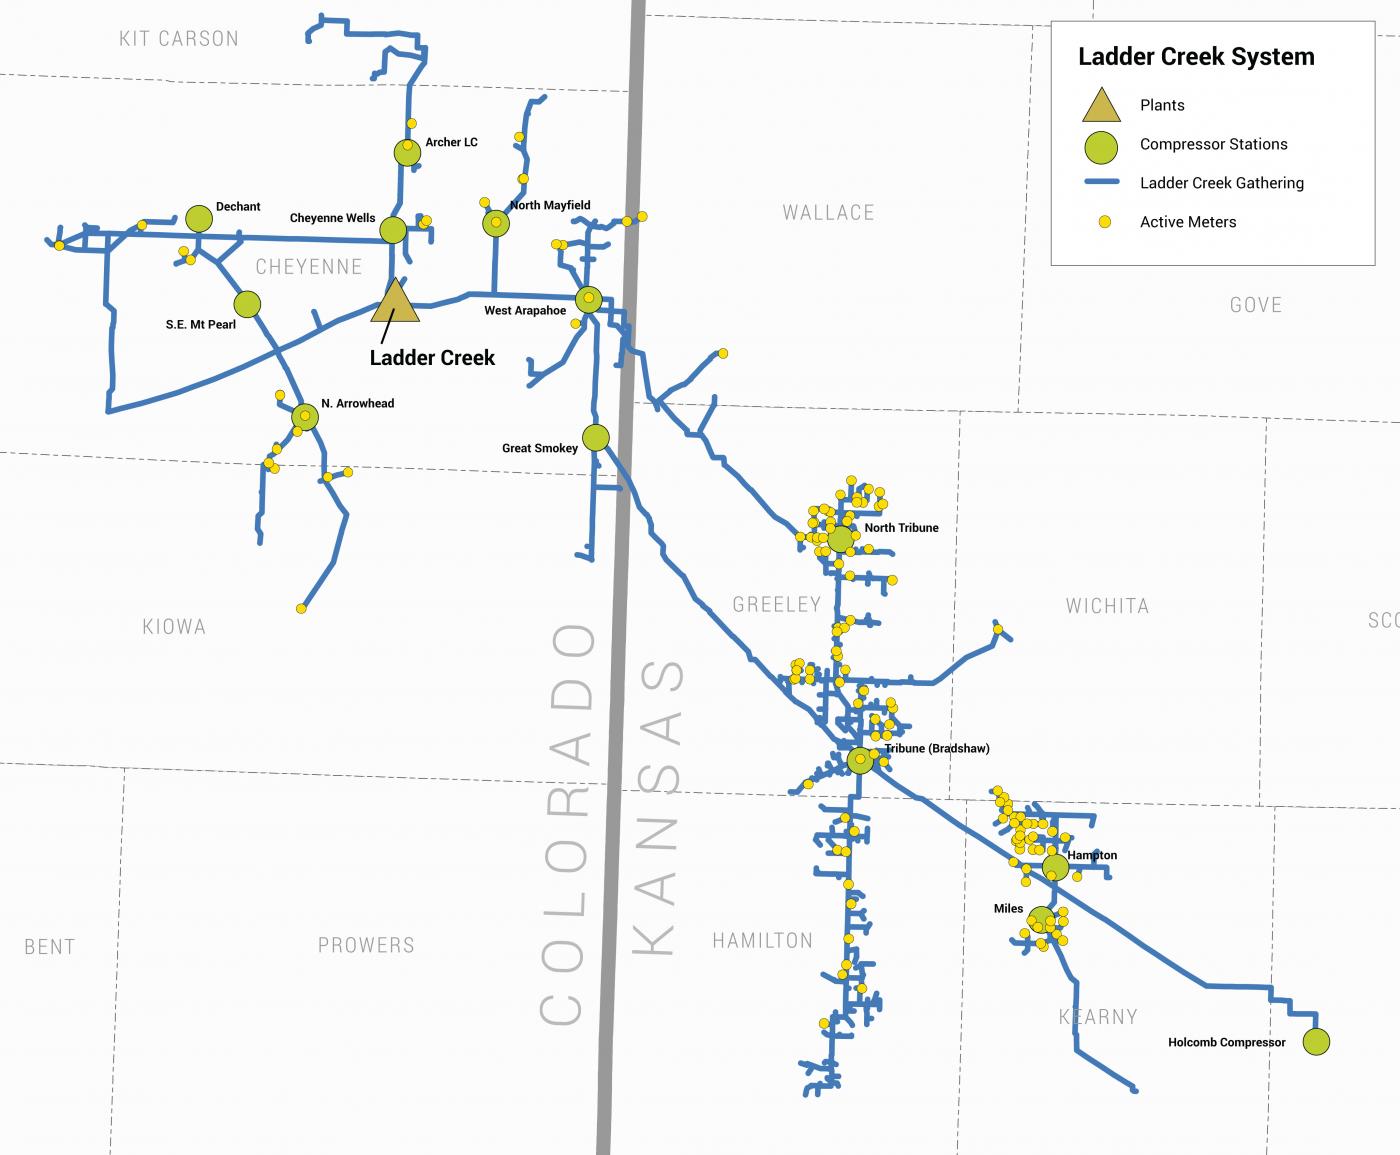 Map of the Ladder Creek System